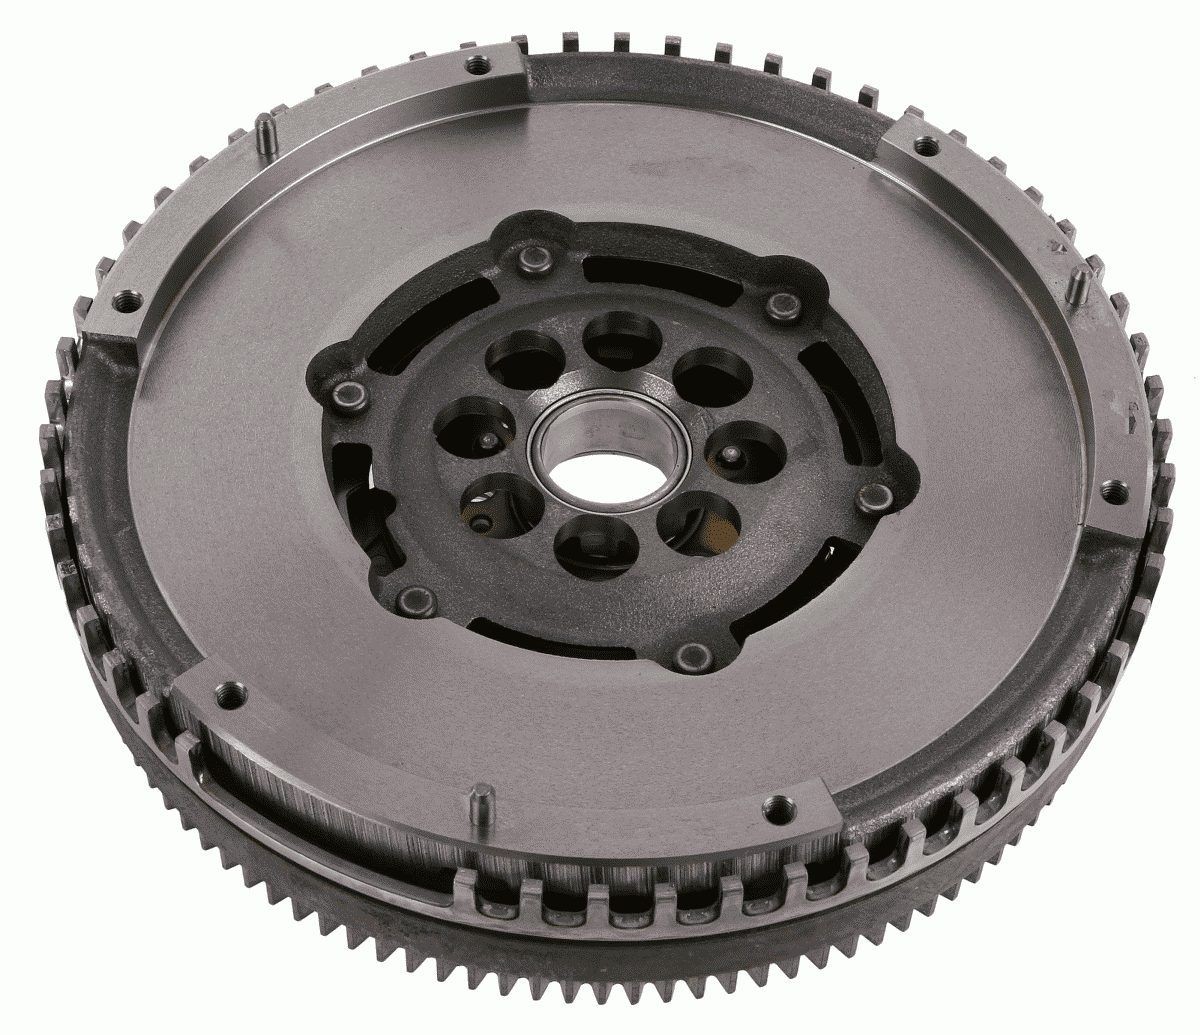 SACHS 2294 501 252 Flywheel MAZDA experience and price